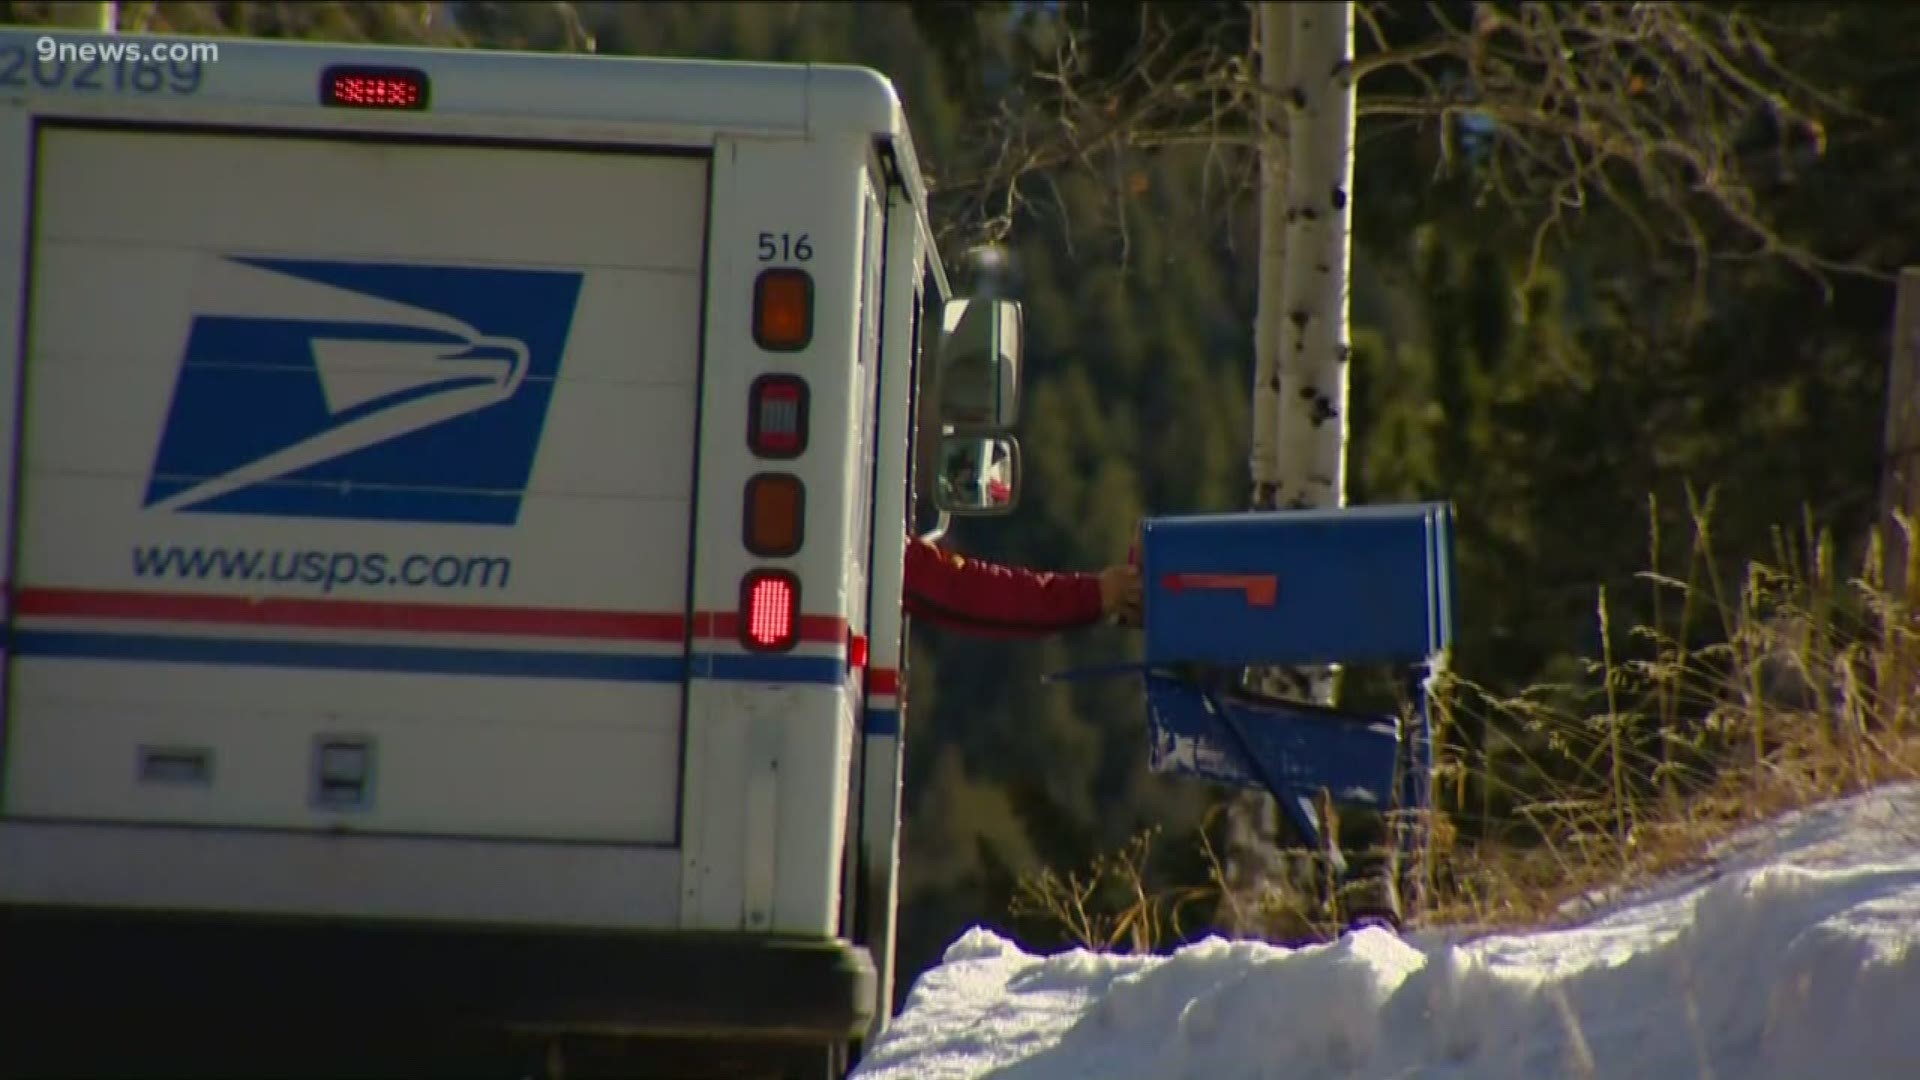 Missing mail and packages? How you can help USPS; Bobo out at CSU and more for Dec. 4, 2019.